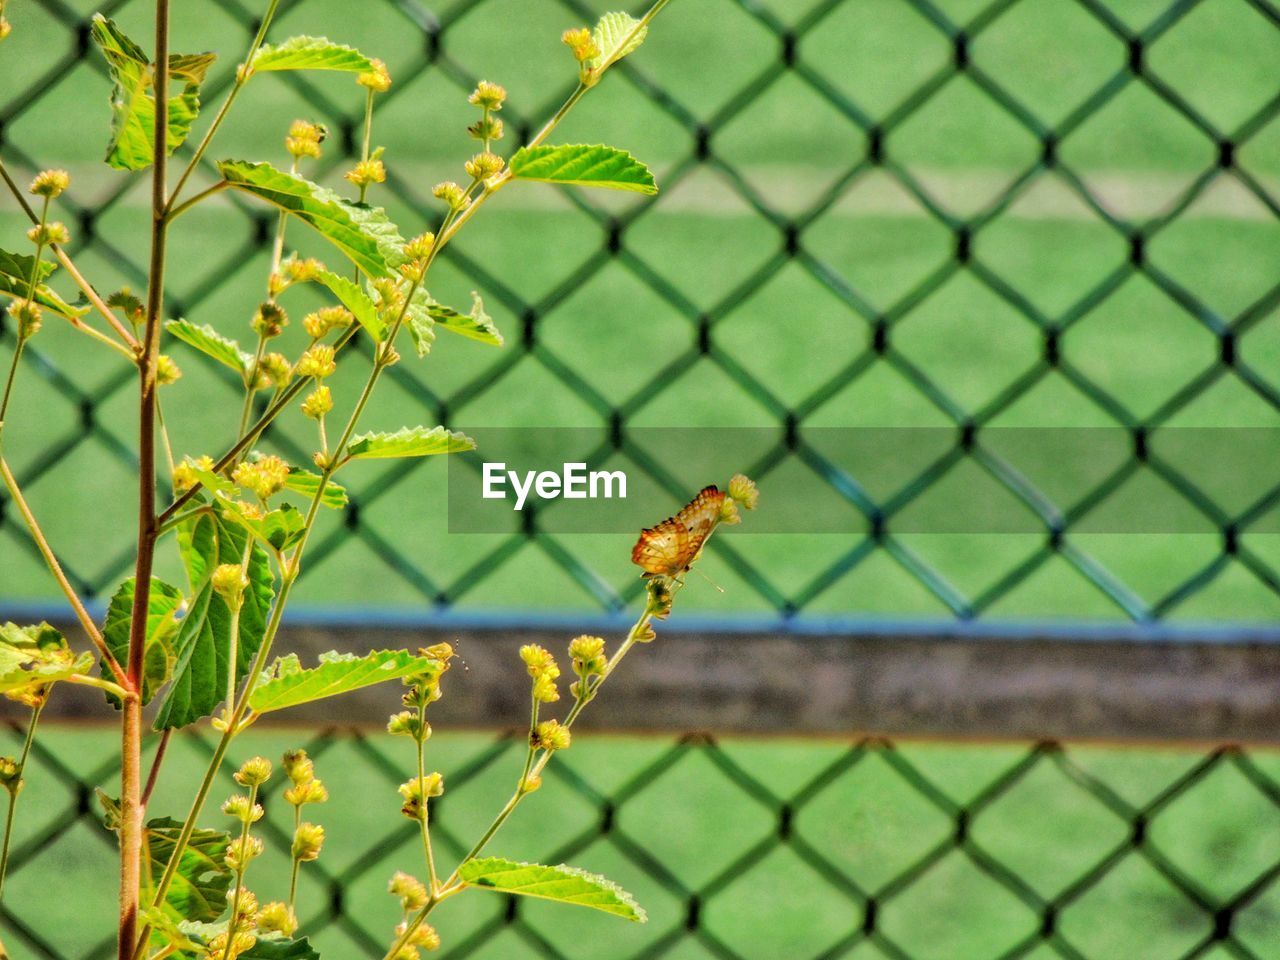 fence, chainlink fence, yellow, green, nature, leaf, no people, plant, animal wildlife, day, focus on foreground, animal themes, animal, security, close-up, one animal, protection, outdoors, wildlife, flower, wire, metal, branch, insect, growth, wire mesh, plant part, beauty in nature